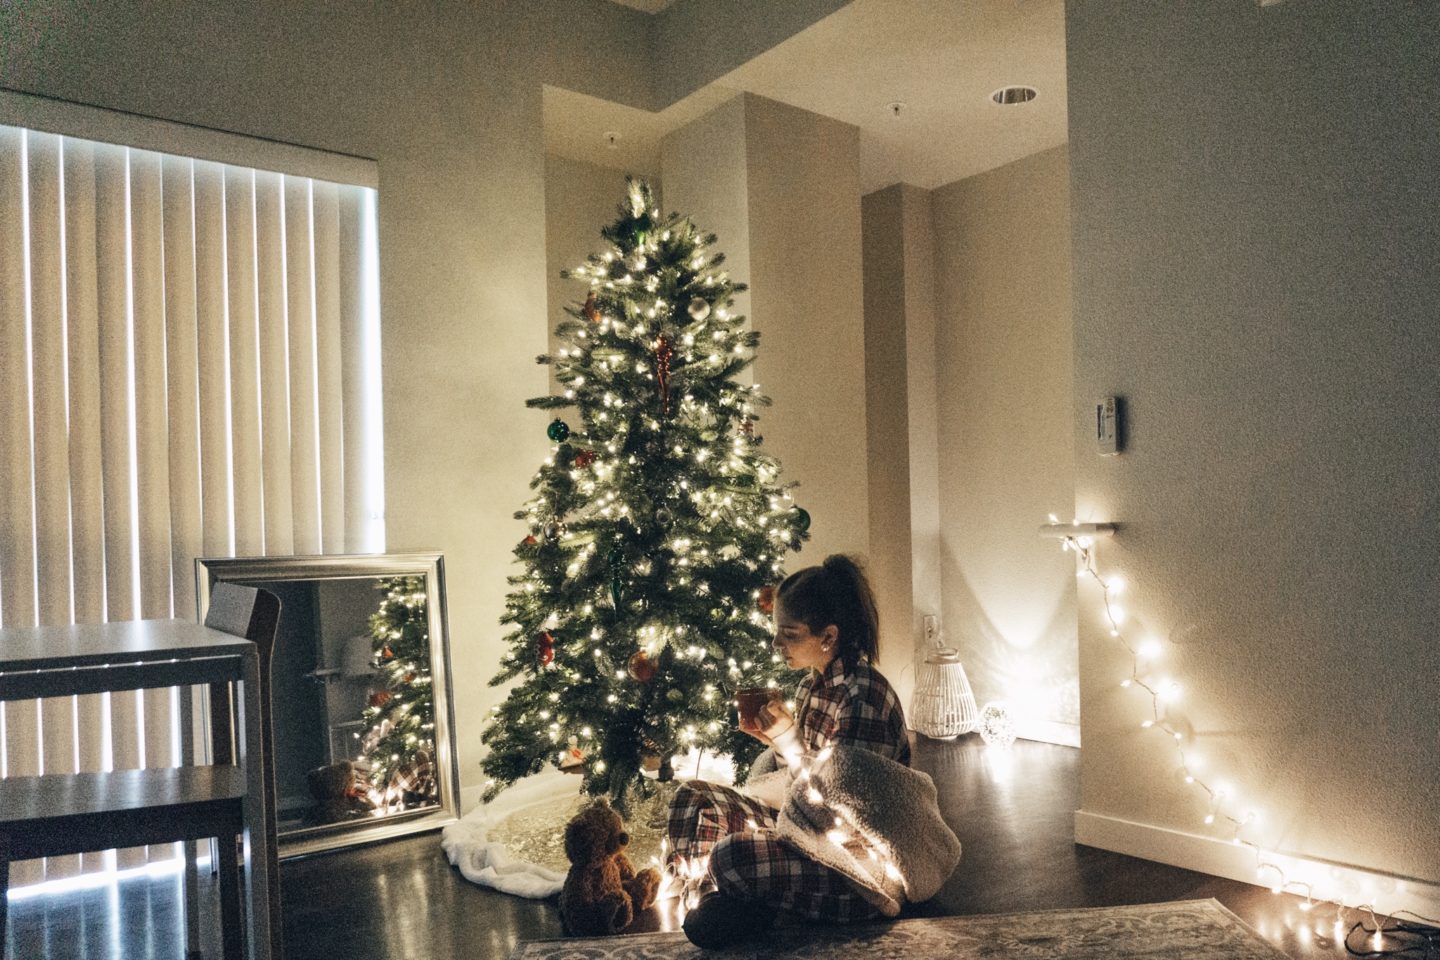 5 Christmas Things You Need For Your First Apartment